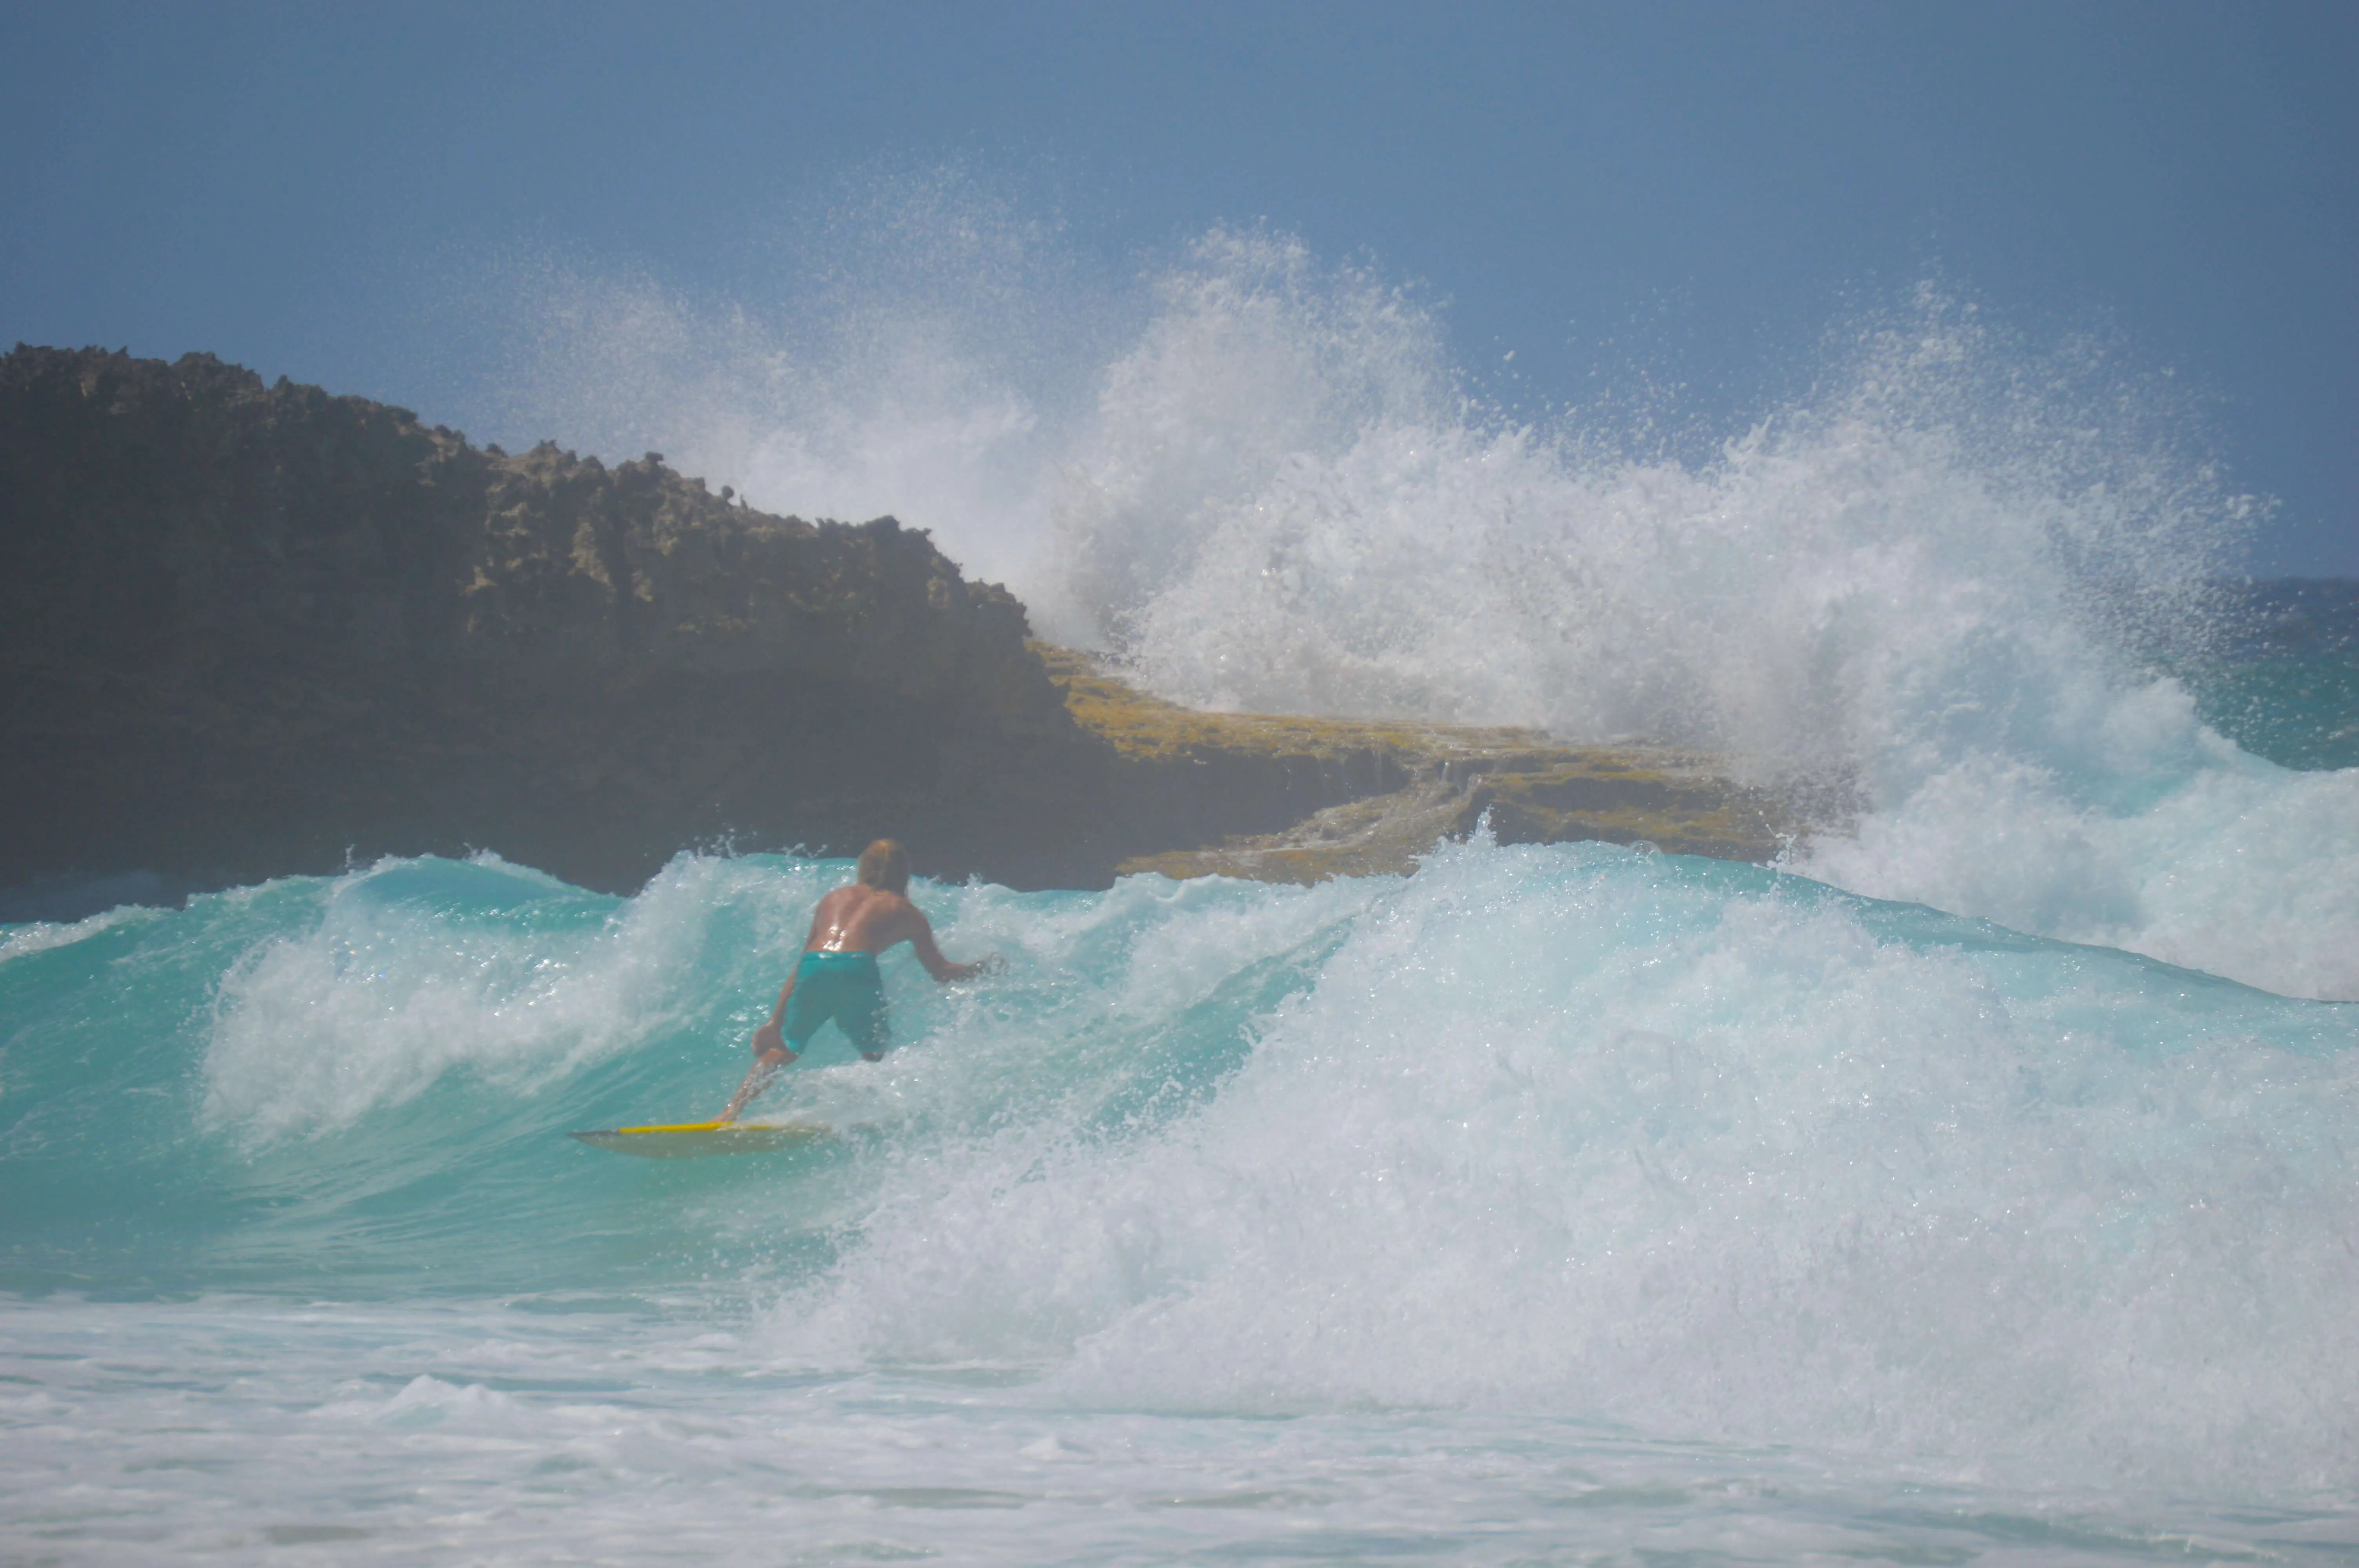 Surfer in the waves at Playa Chikitu on Bonaire